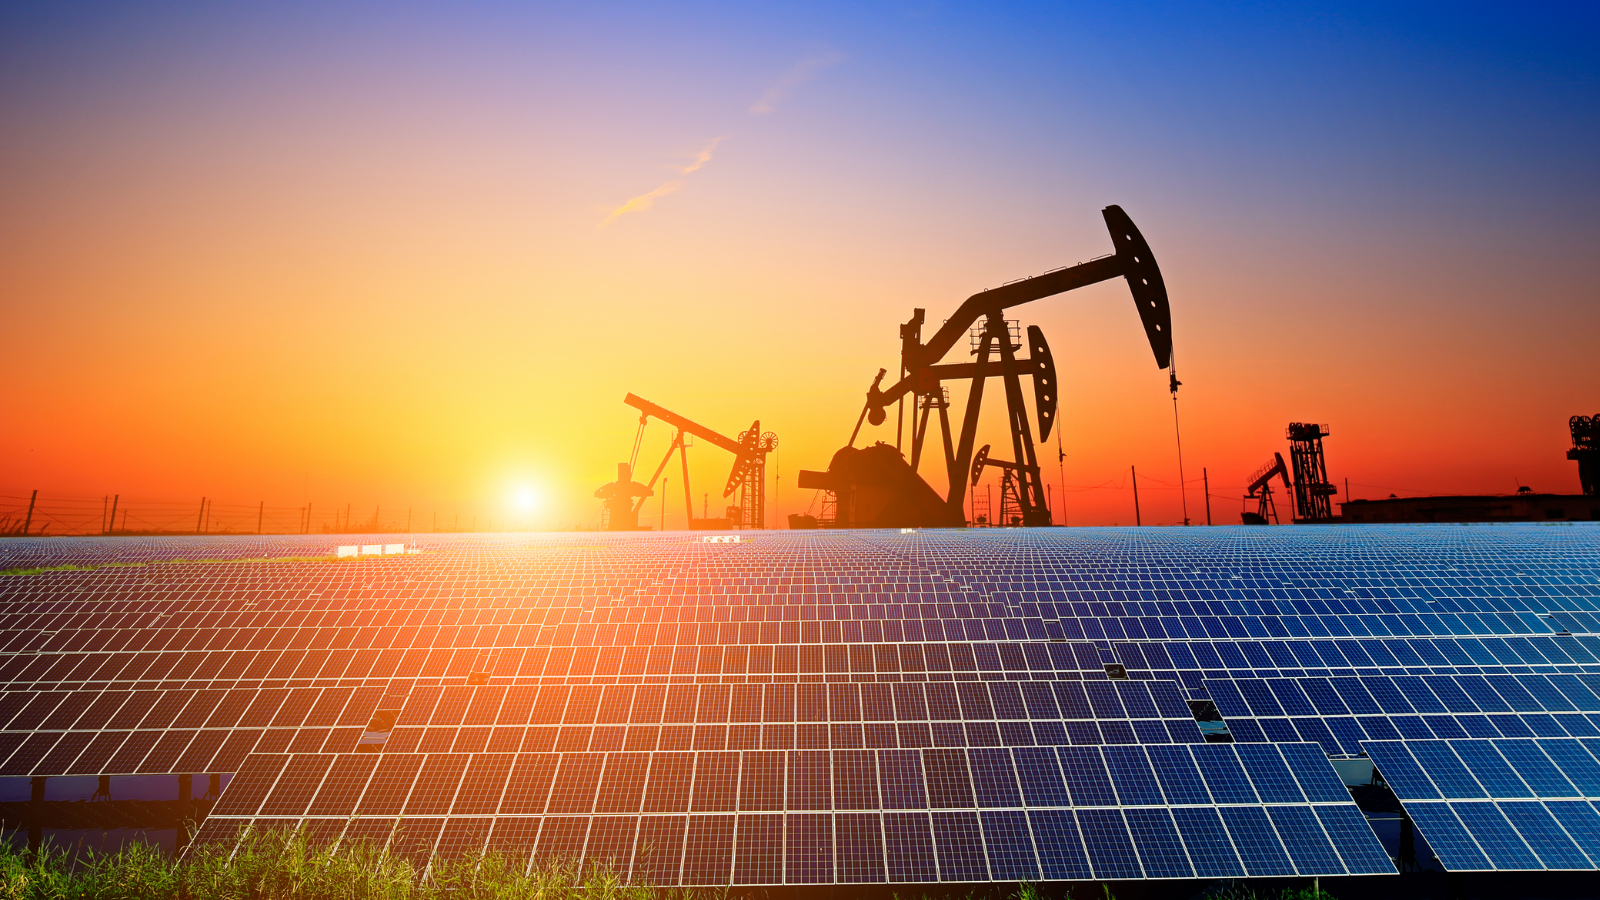 ESG Investing and the US Oil and Gas Industry: An Analysis of Climate Disclosures